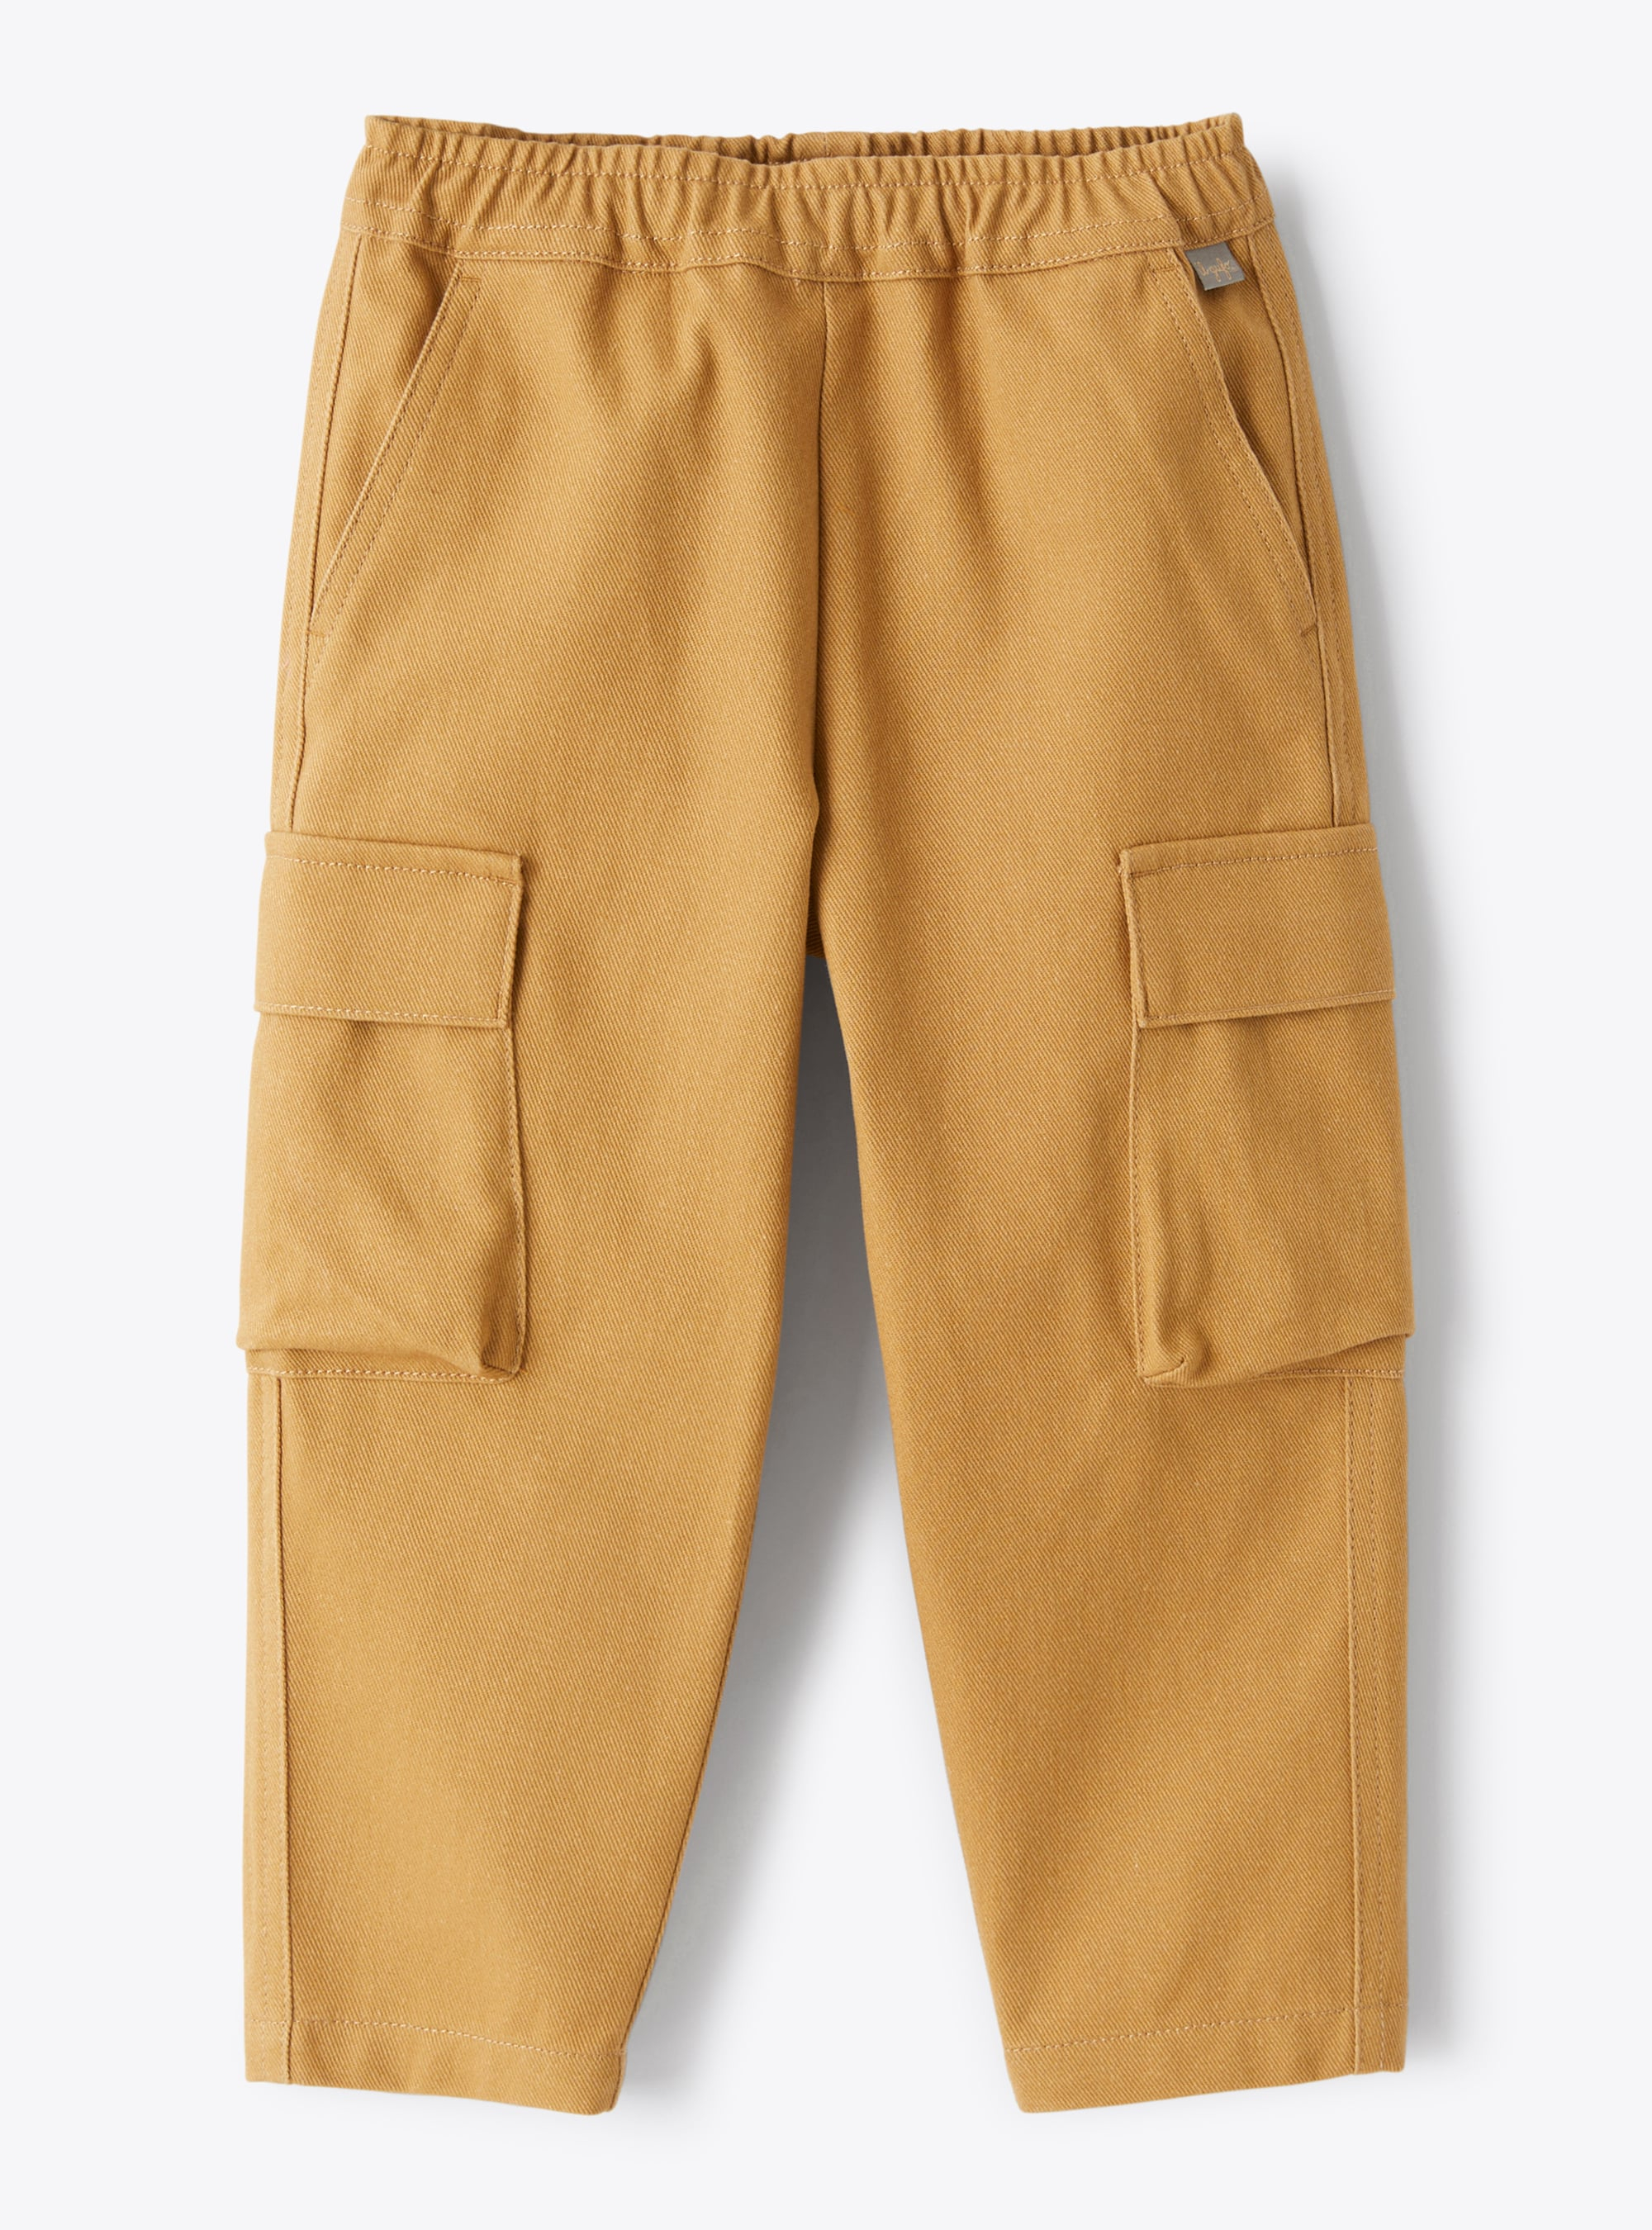 Cargo pants in brown bull cotton - Brown | Il Gufo